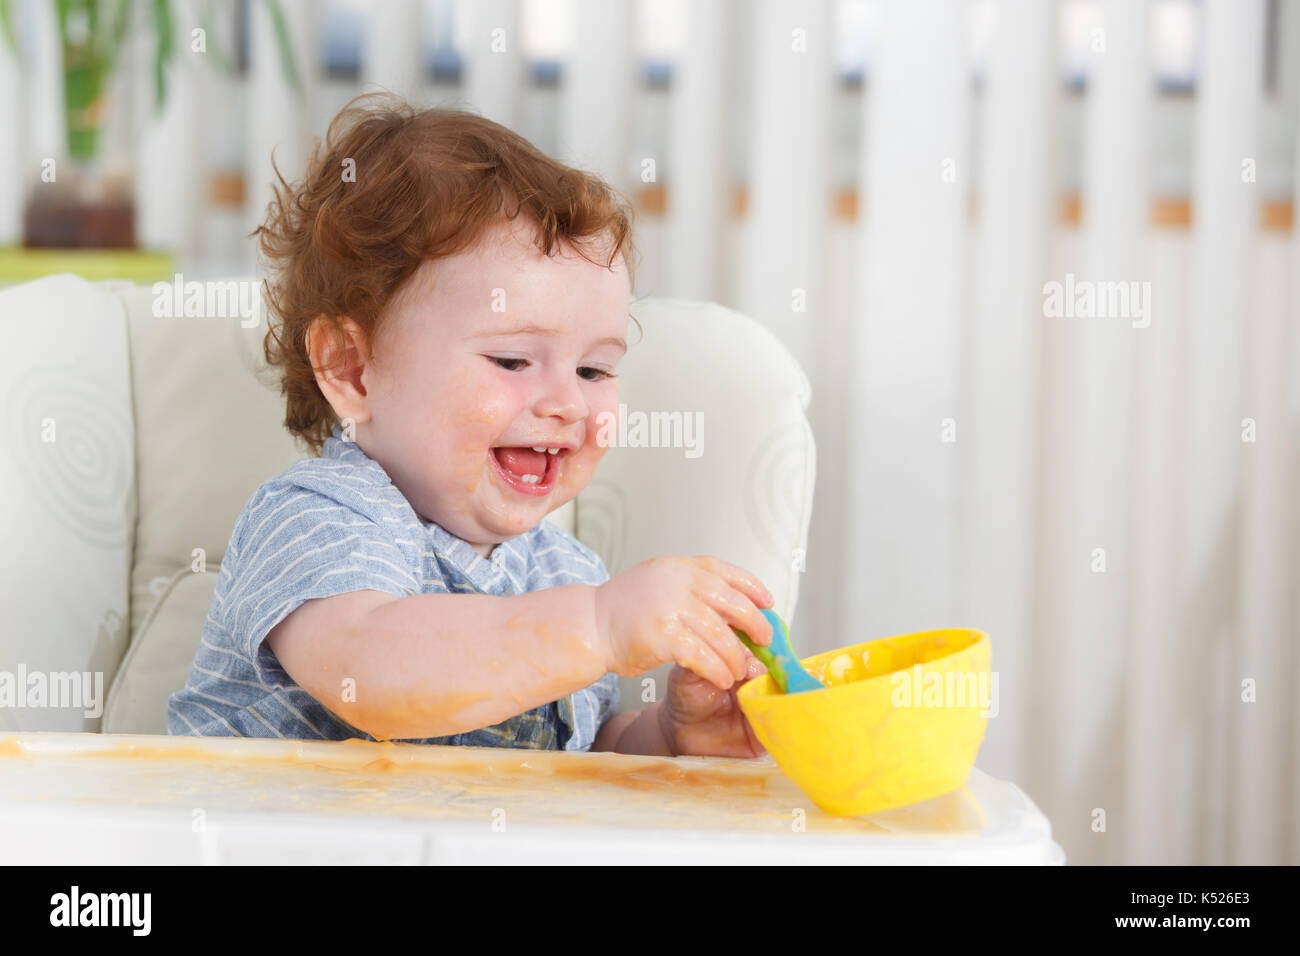 Cute baby boy eating by himself on high chair Stock Photo